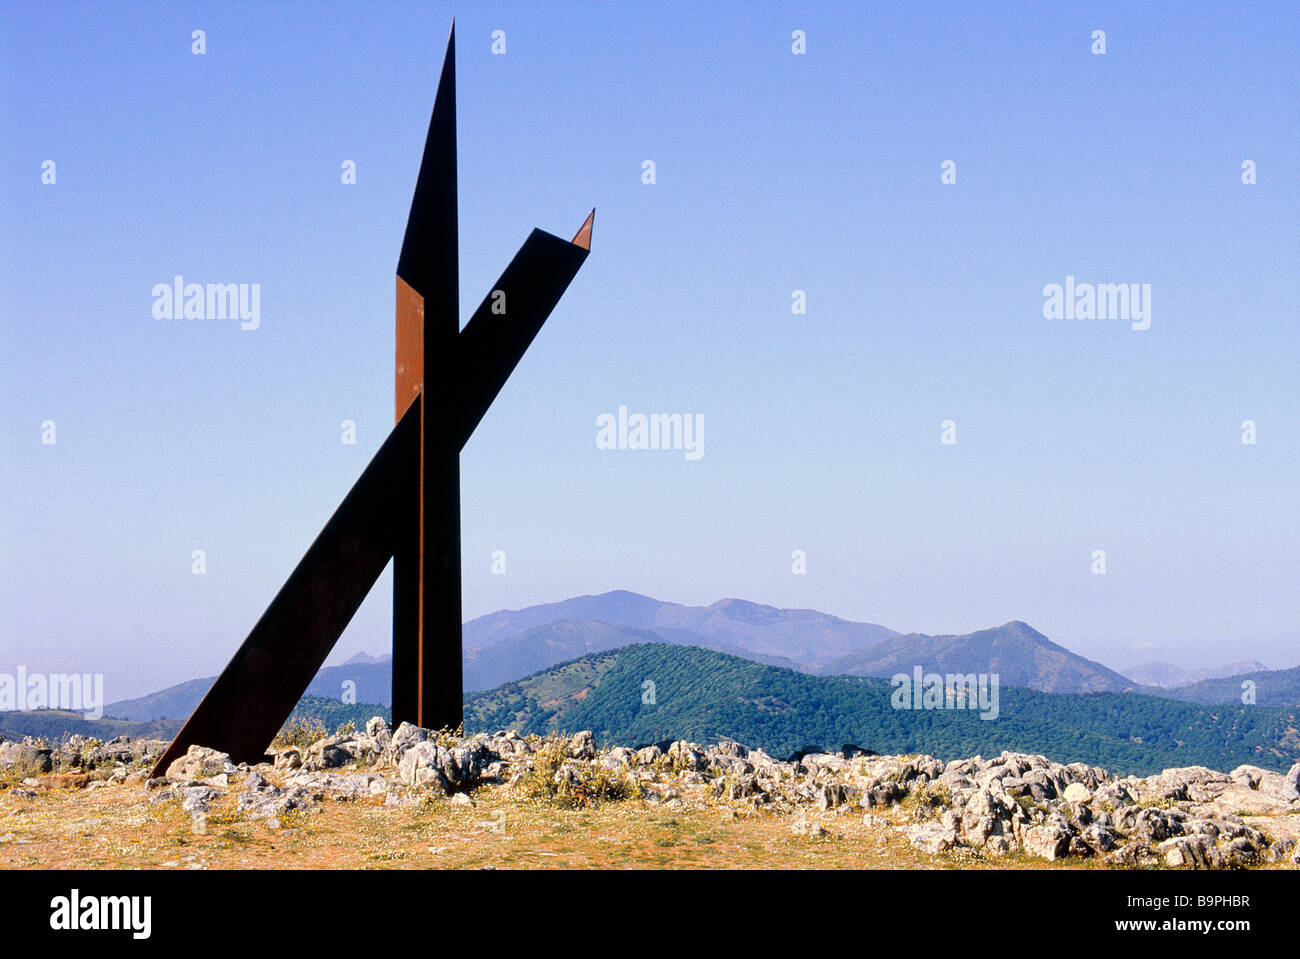 Spain, Andalusia, Costa del sol on the A376 highway monument and view on the Sierra de las Nieves  from Pass Puerto de Alijar Stock Photo